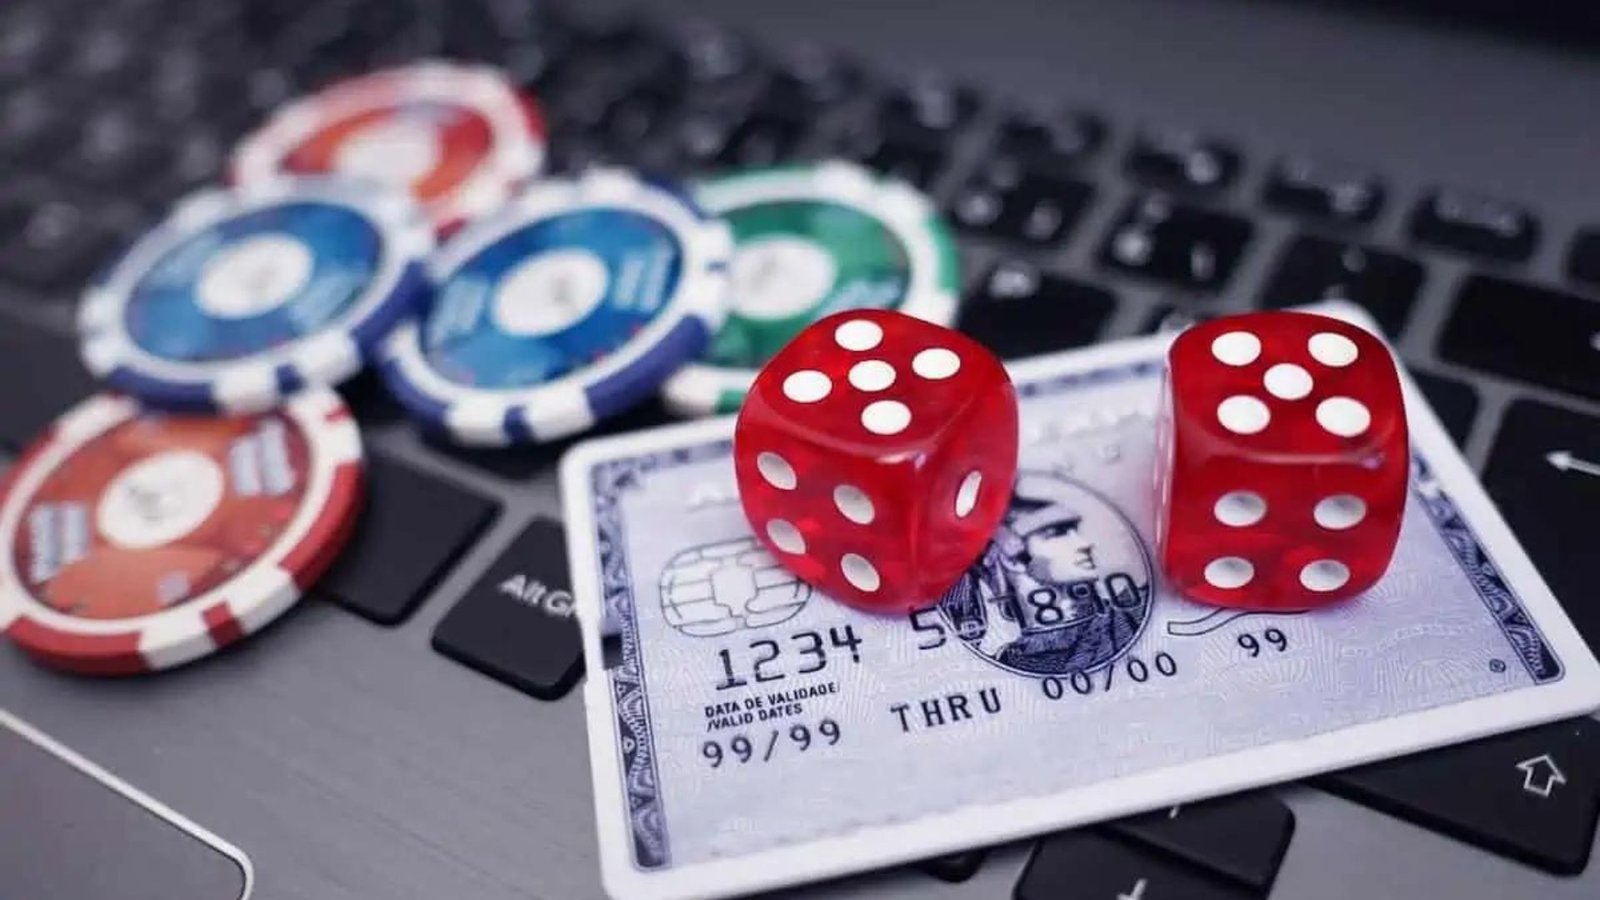 this picture shows Online gambling